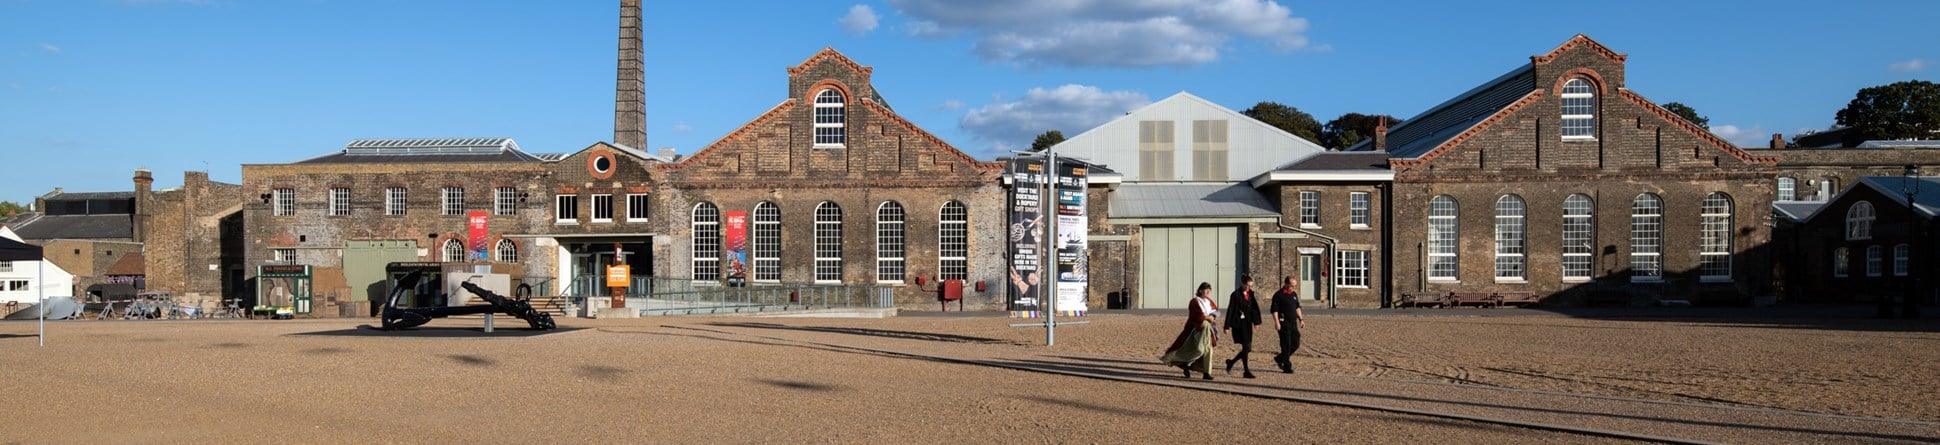 View of a group of buildings at Chatham Dockyards.